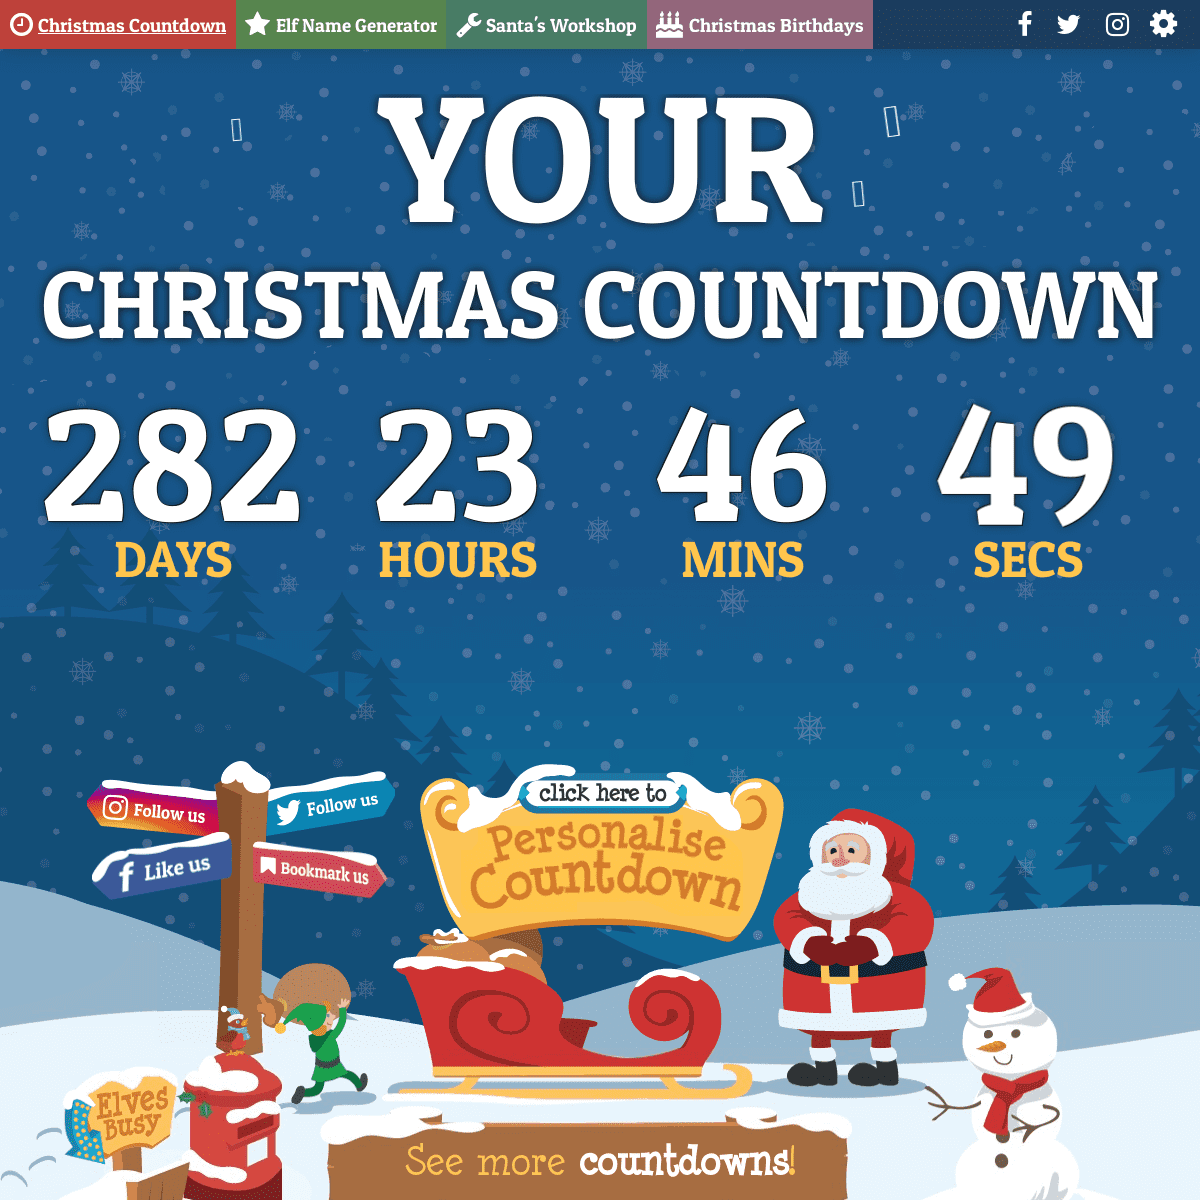 A complete backup of yourchristmascountdown.com